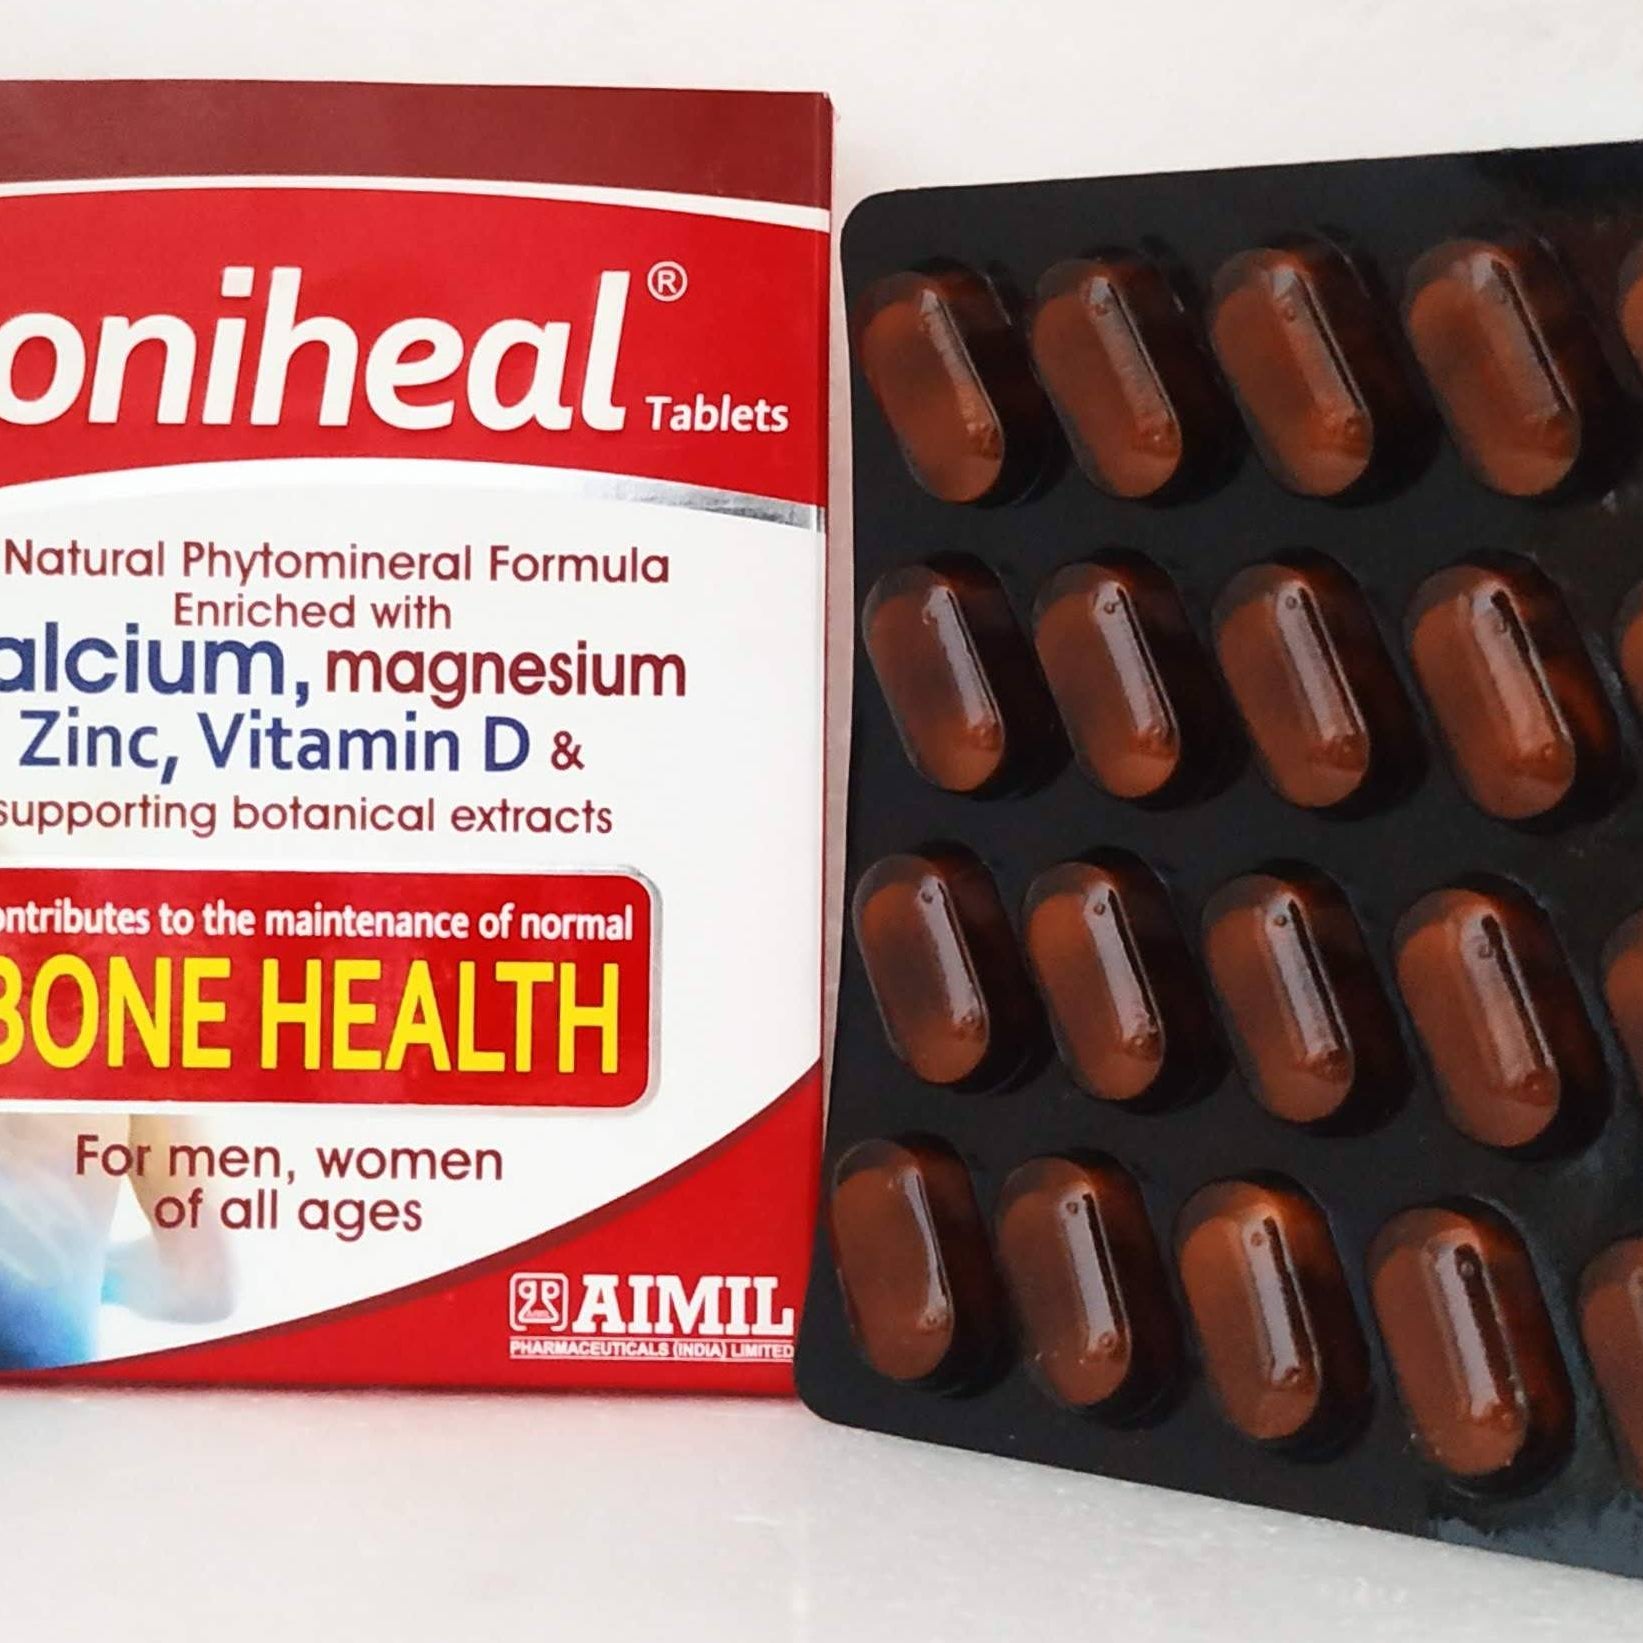 Shop Boniheal Tablets - 20Tablets at price 160.00 from Aimil Online - Ayush Care